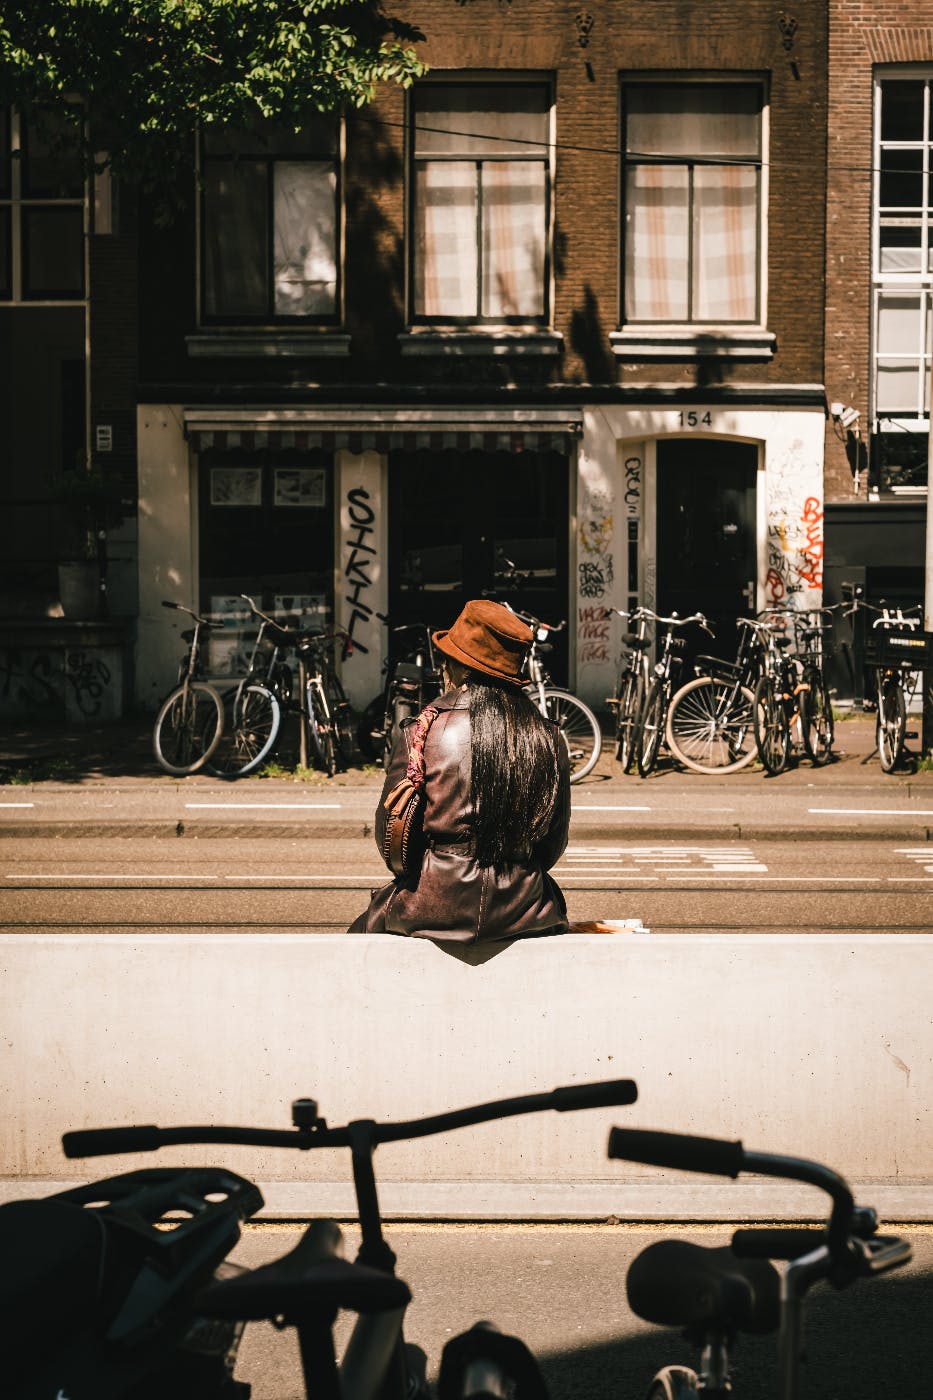 A woman sitting on a street divide sorrounded by bikes and the city